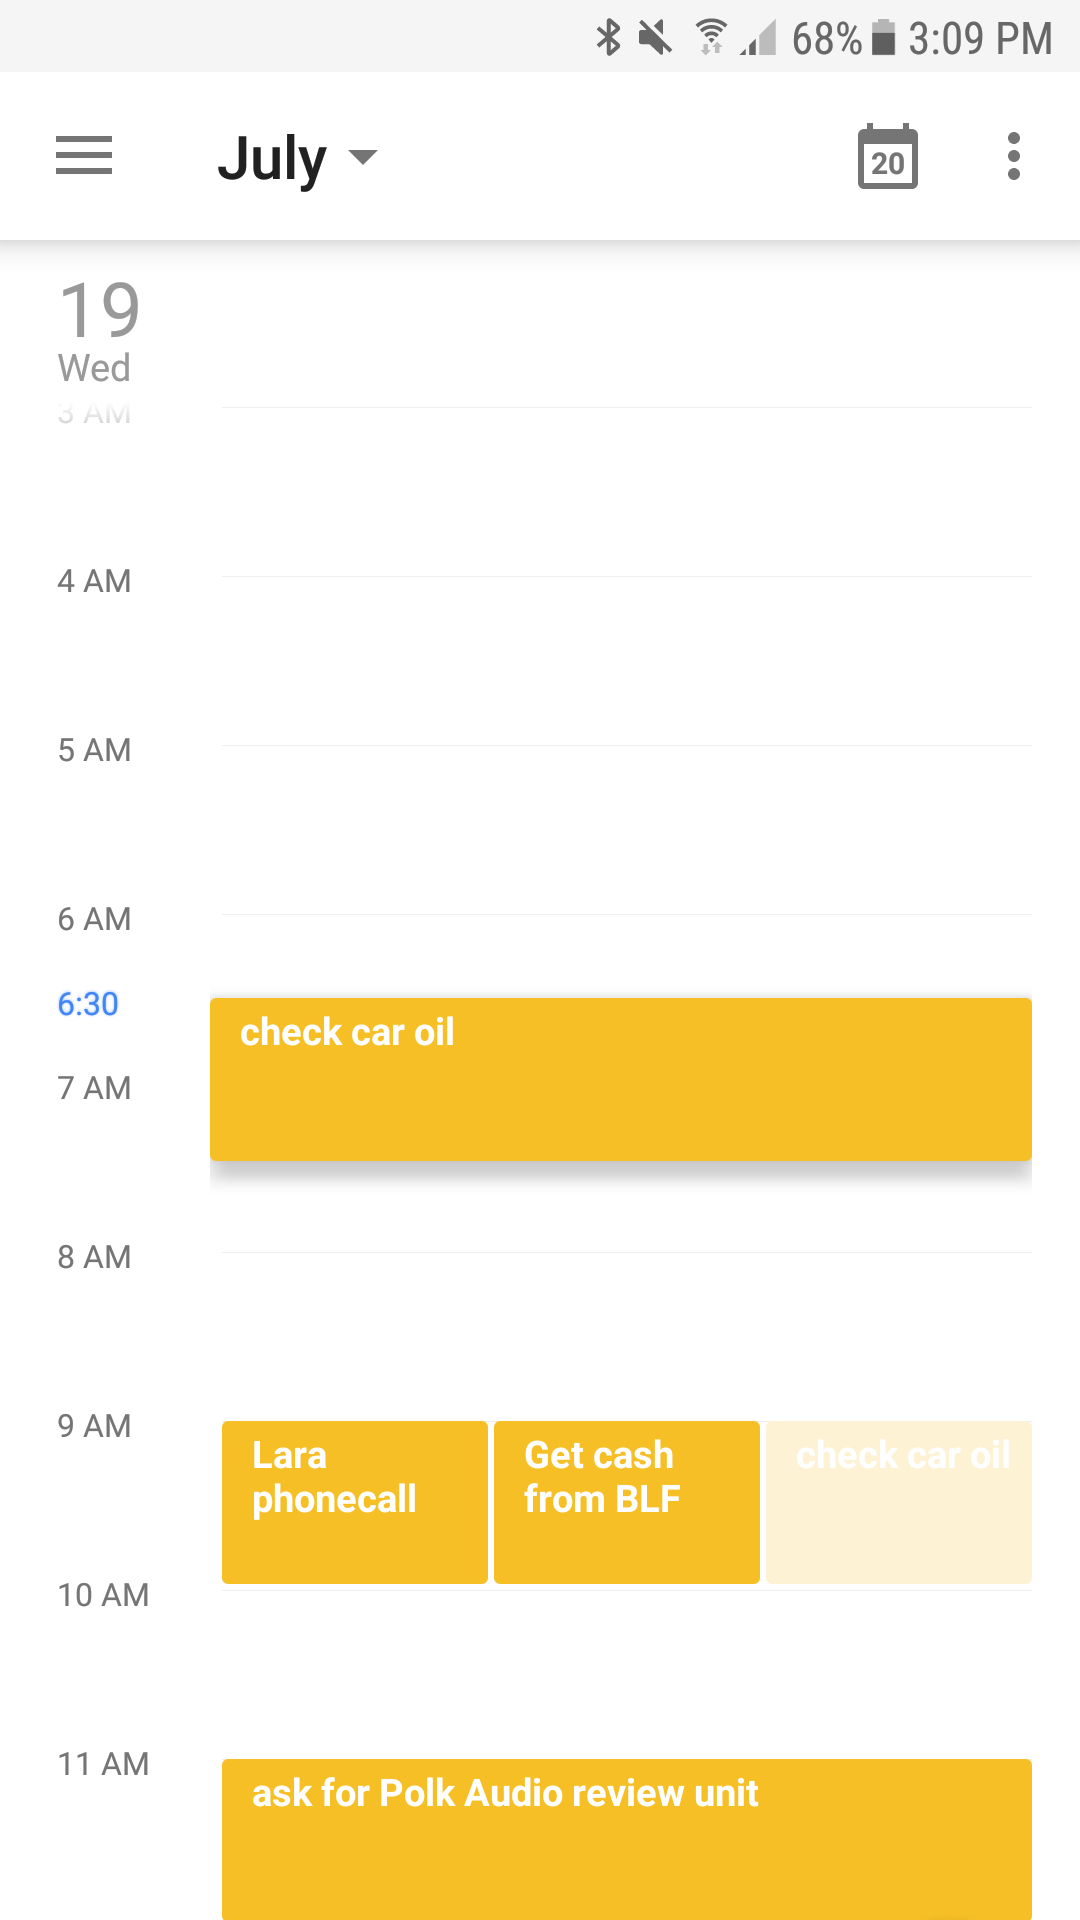 PSA Google Calendar added a draganddrop gesture for moving events to